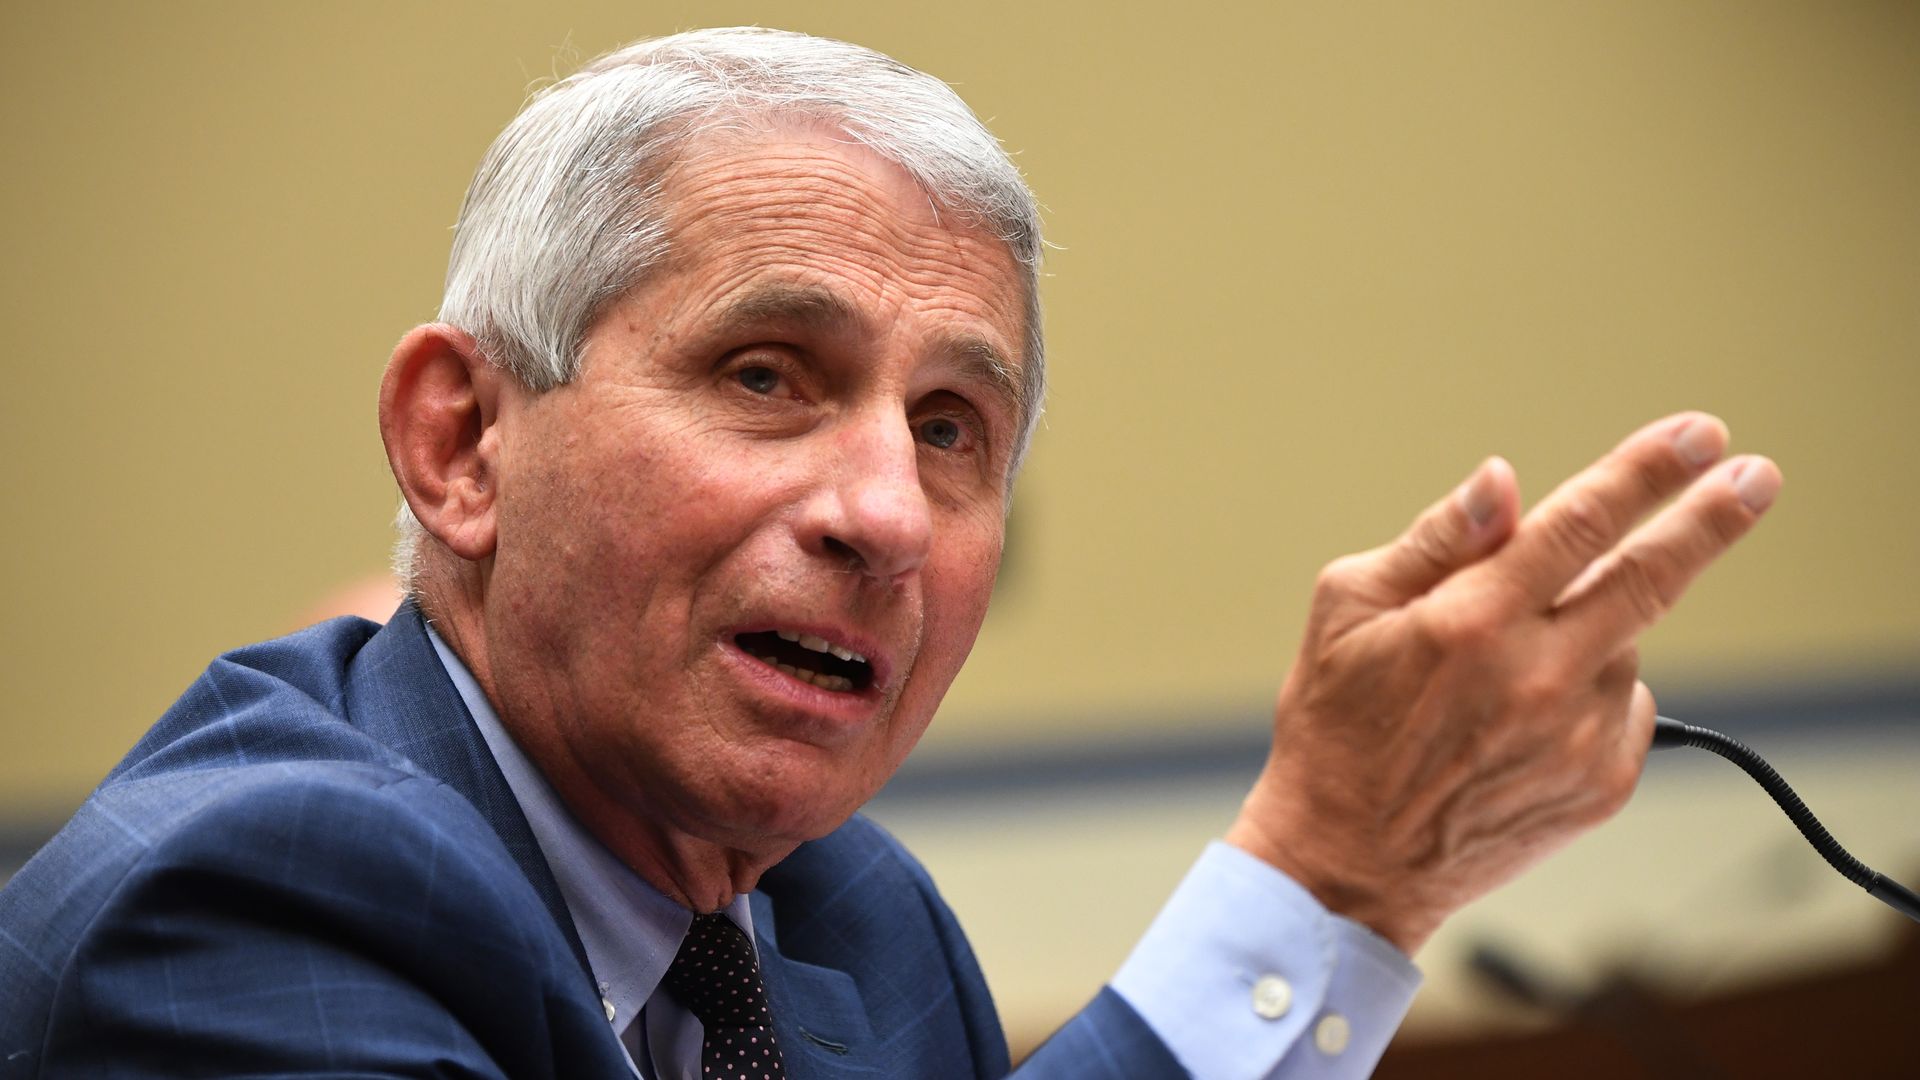 Dr. Anthony Fauci, director of the National Institute for Allergy and Infectious Diseases, testifies before a House Subcommittee on the Coronavirus Crisis hearing on July 31, 2020 in Washington, DC. 